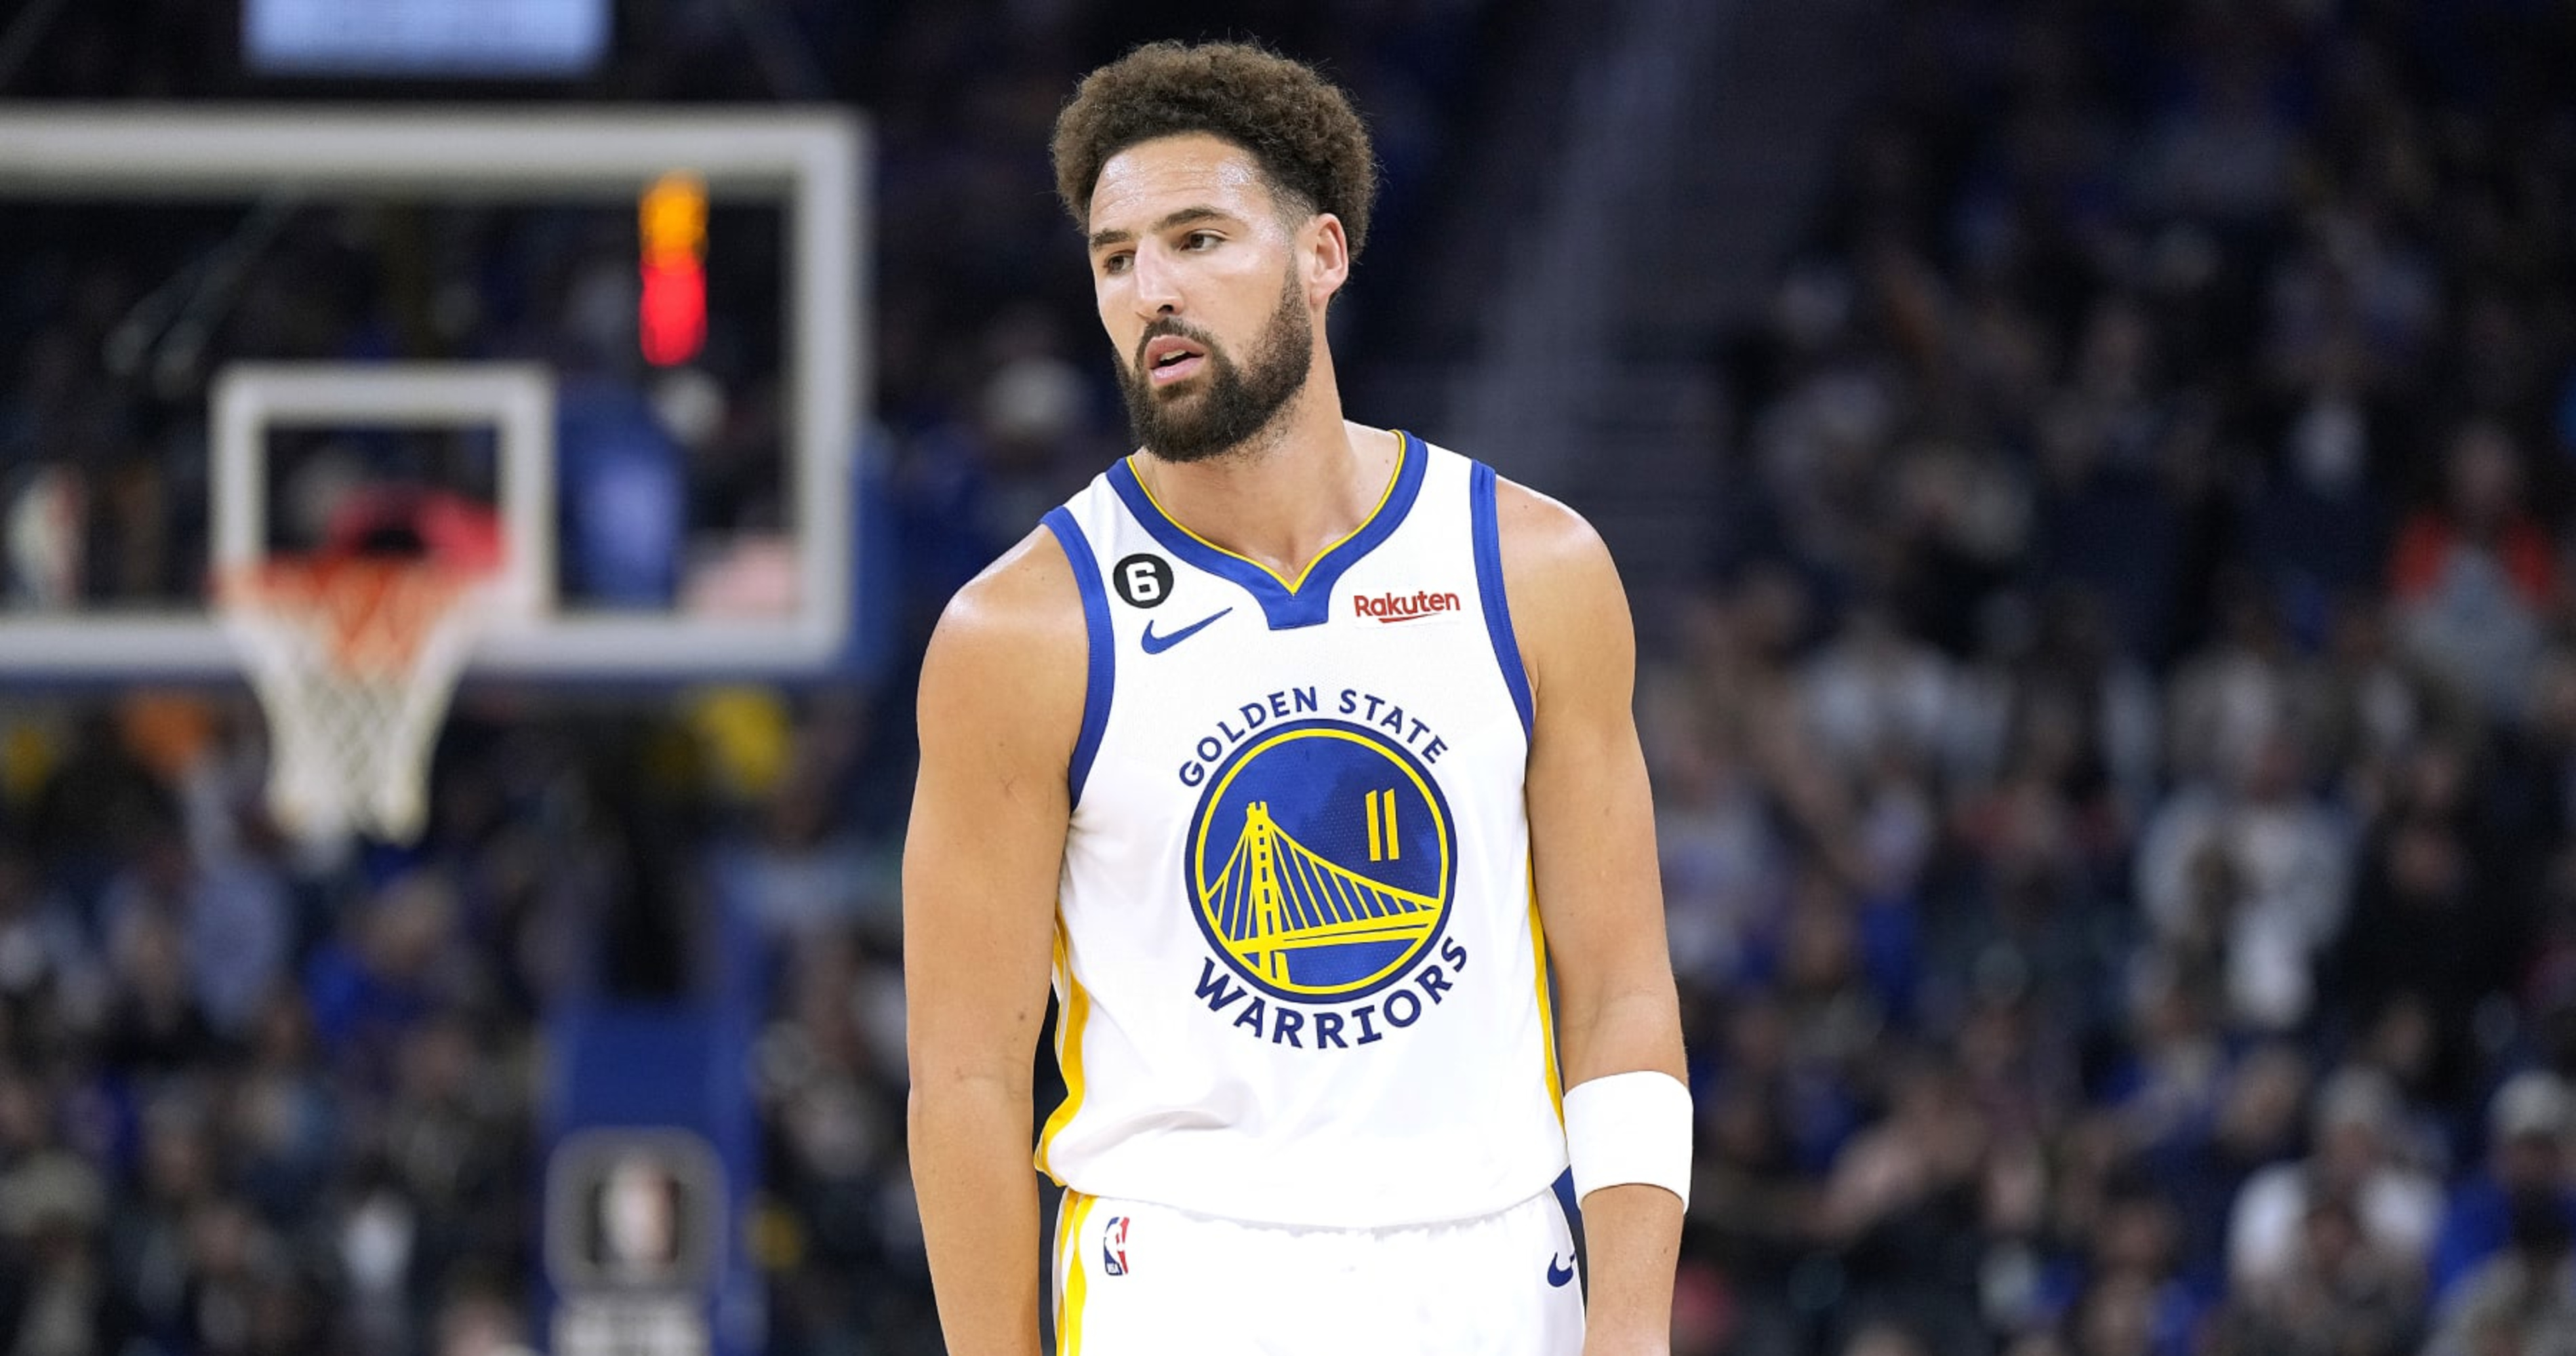 Game 6 Klay,' explained: How Warriors' Klay Thompson earned